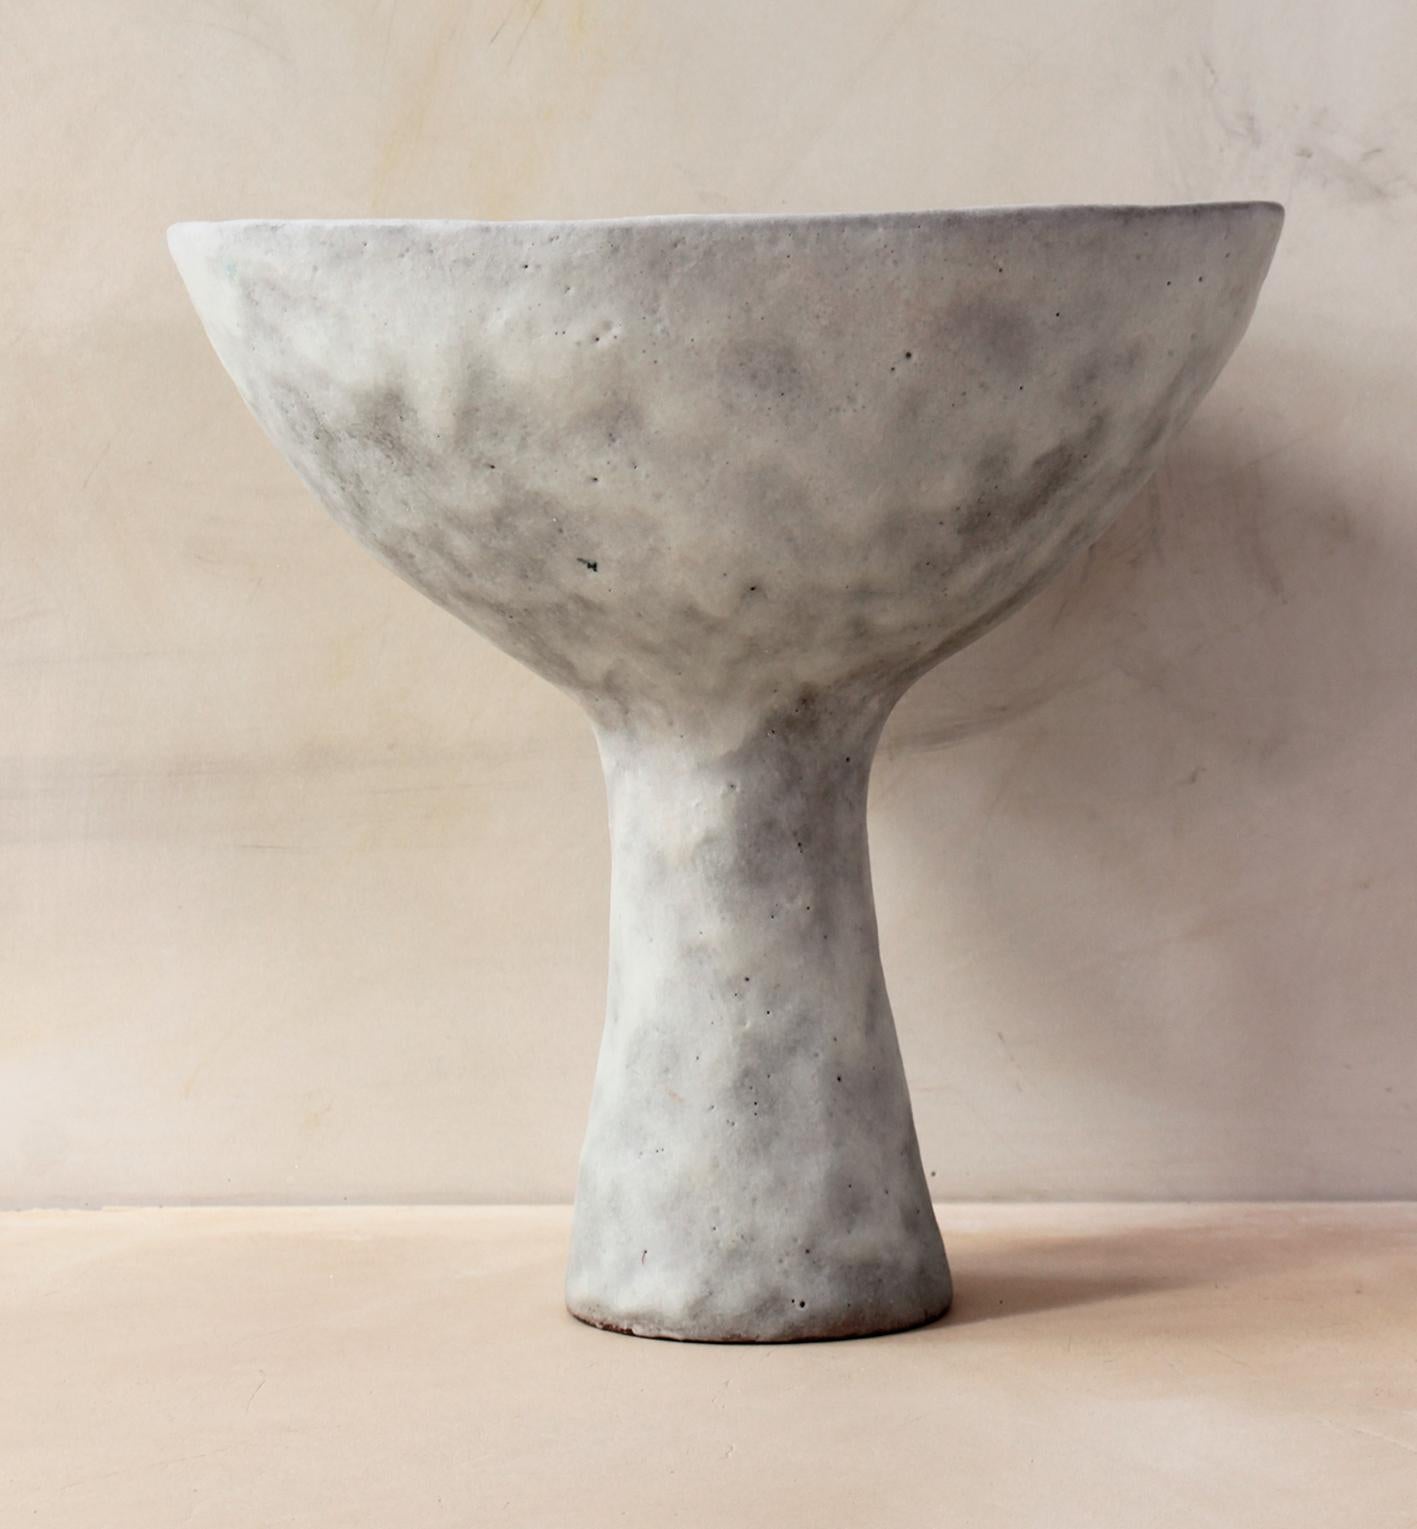 Ghostcup vase by Silvia Valentín
2019
Signed
Materials: Stoneware, mineral glaze
Dimensions: diameter 28 cm x 27.5 cm high
Weight: 2.435 kg

Silvia Valentín
Graduated in Fine Arts in 1991. 
Restorer of wall paintings and